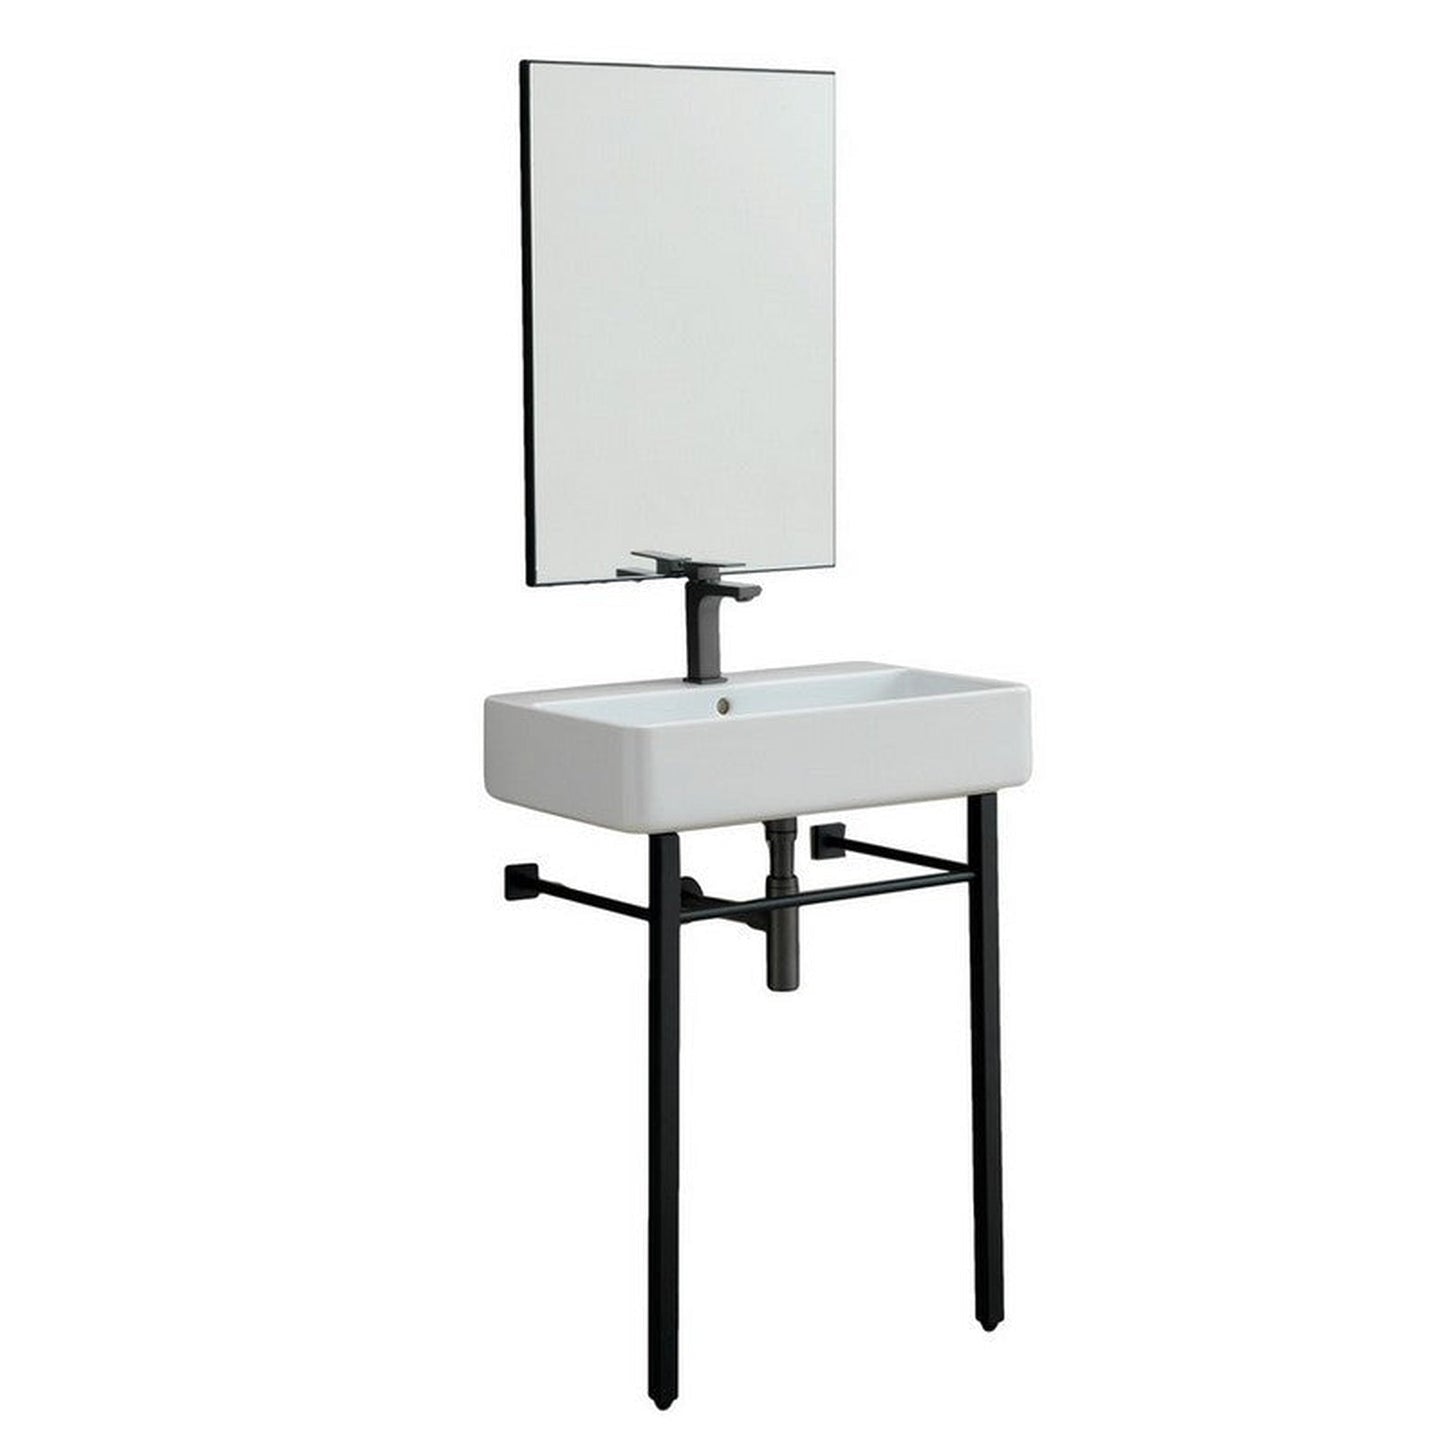 Eviva Eliza 26" x 34" Italian Matte Black Ceramic Console Sink With Brass Stand Legs and Towel Rail